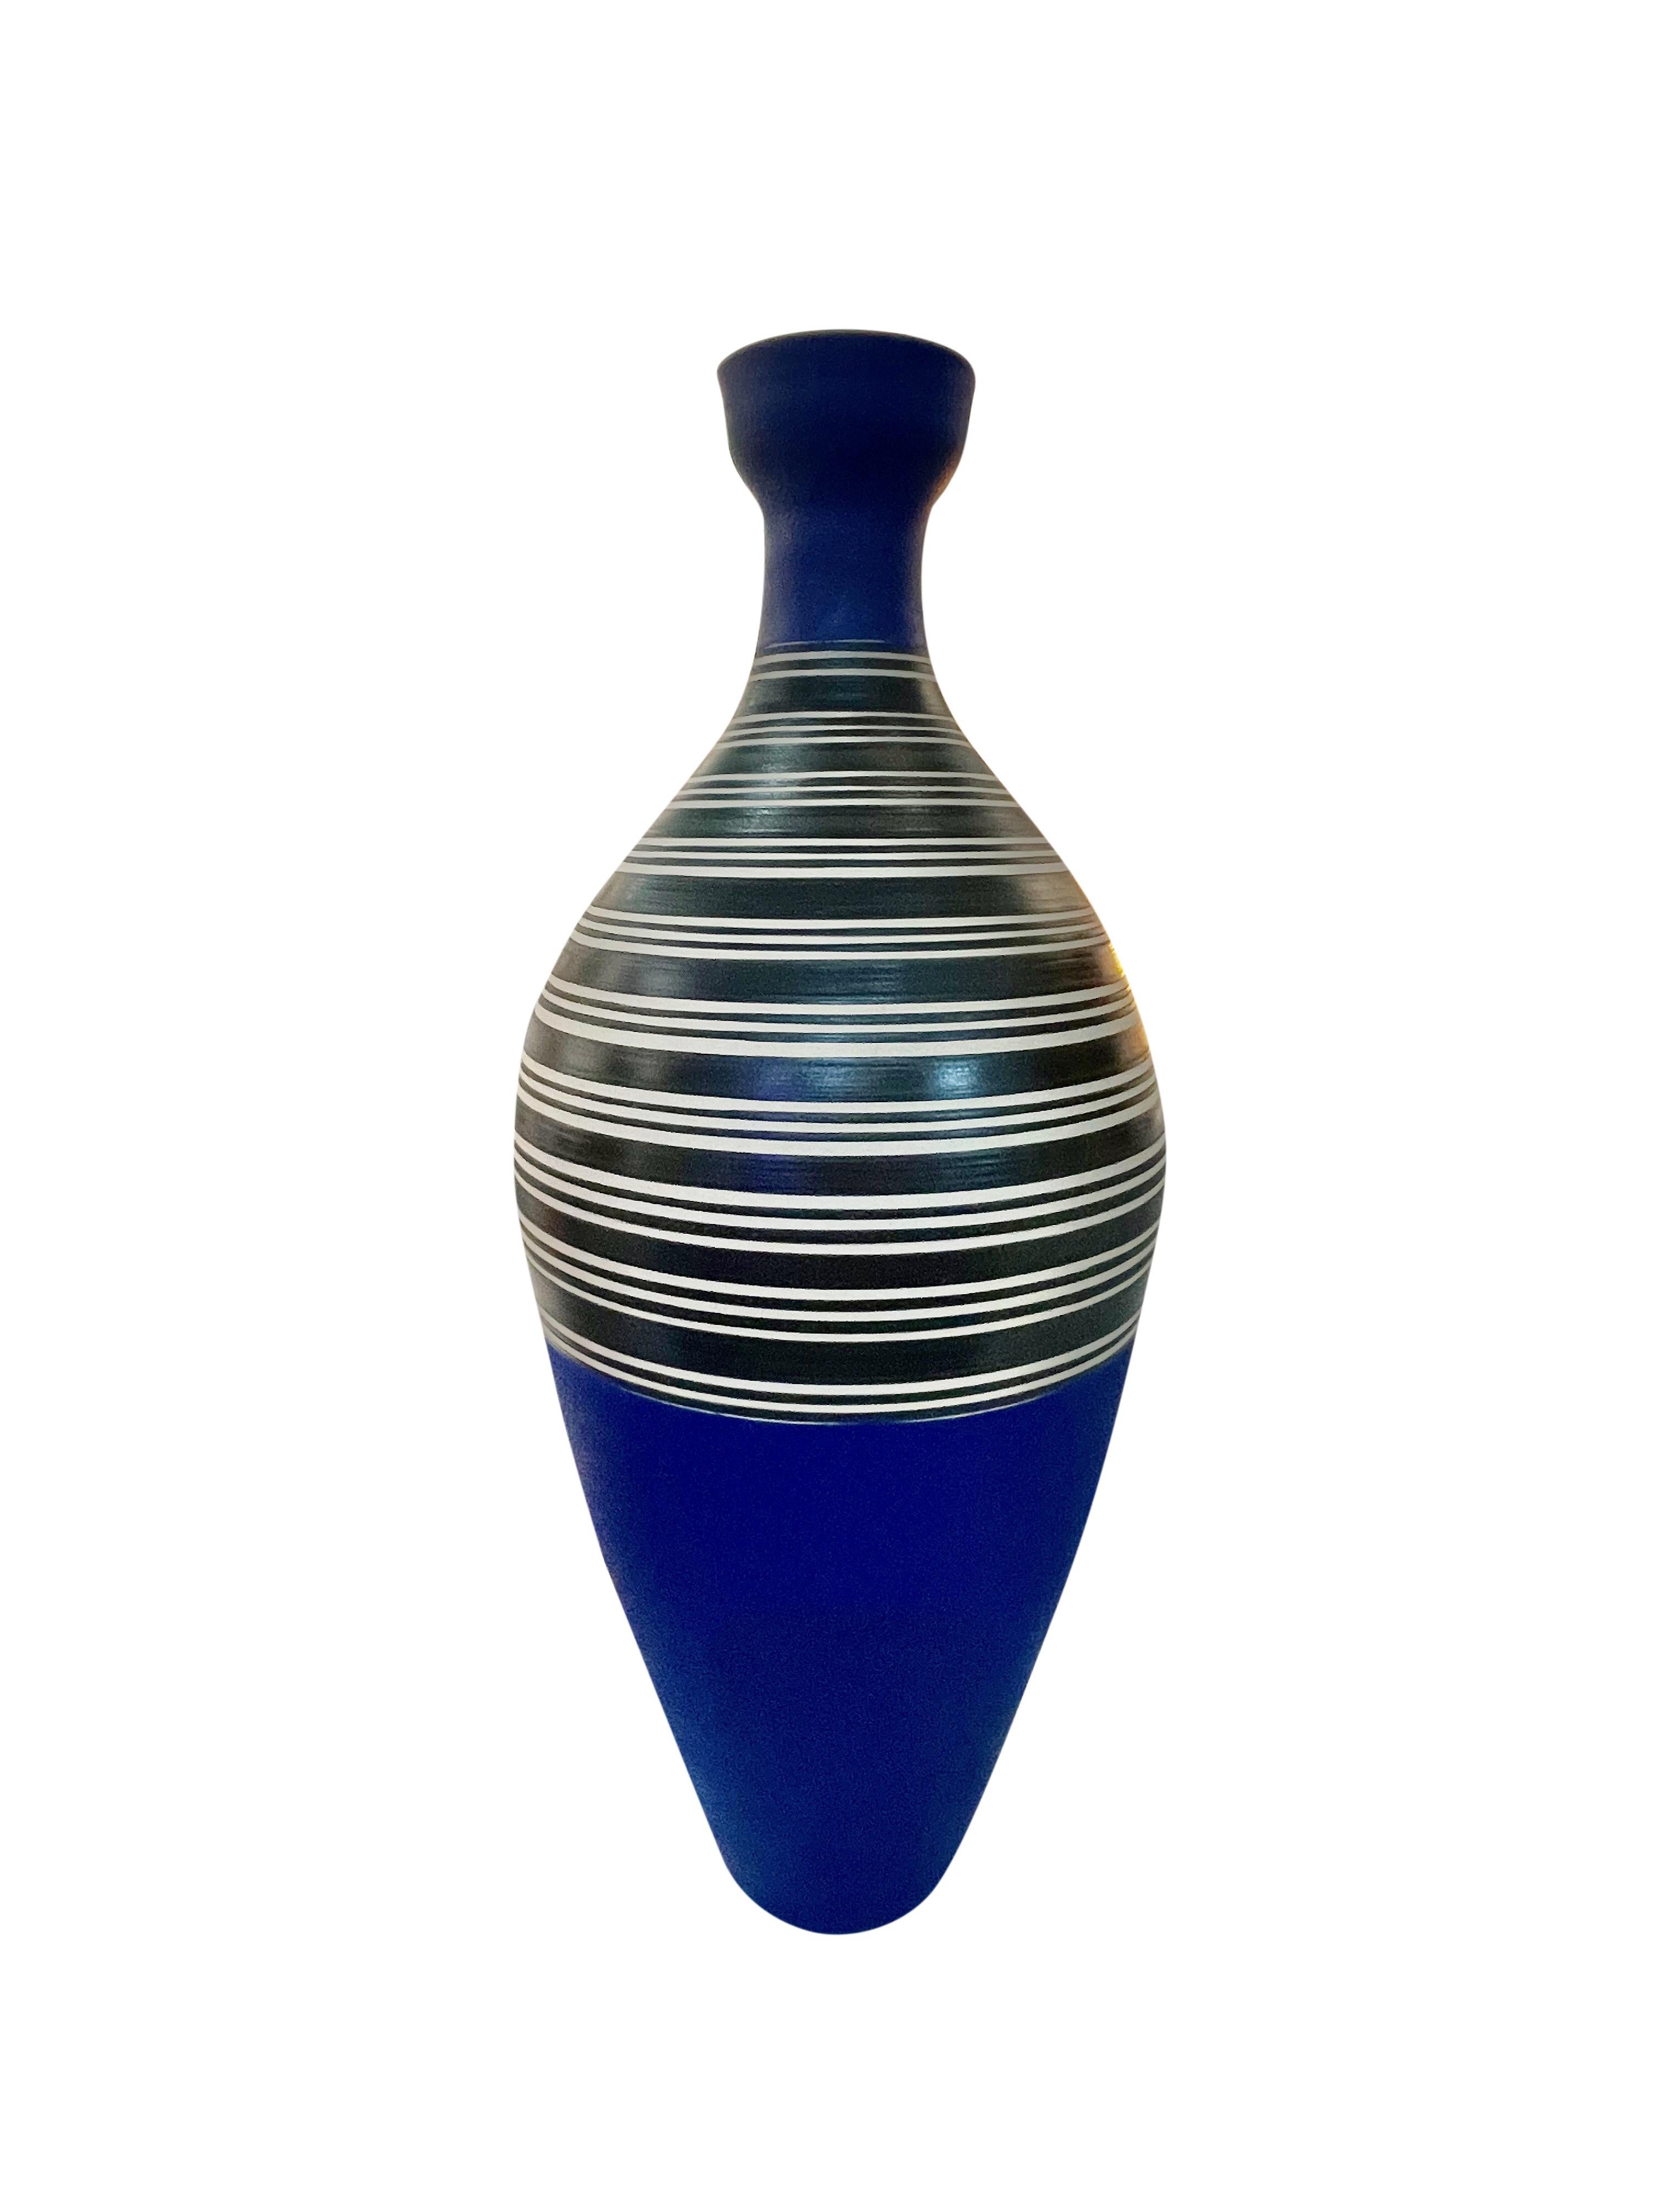 Contemporary Turkish hour glass shaped vase with cobalt blue base and cup top opening.
Bands of black and white stripes in the center of the vase.